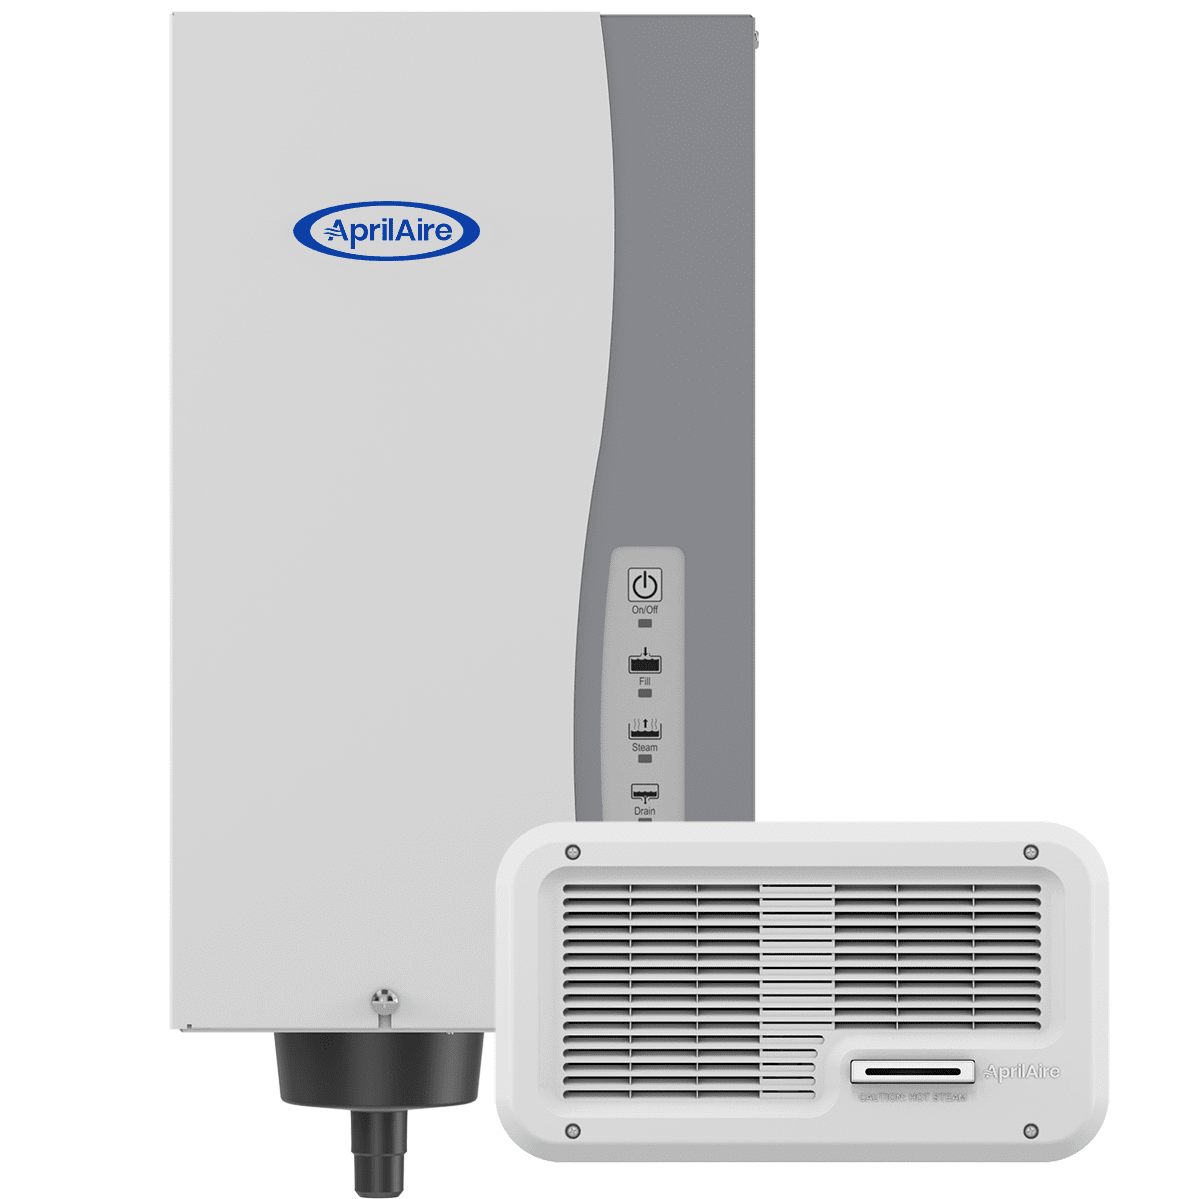 Aprilaire Model 865 Ductless Steam Humidifier Package